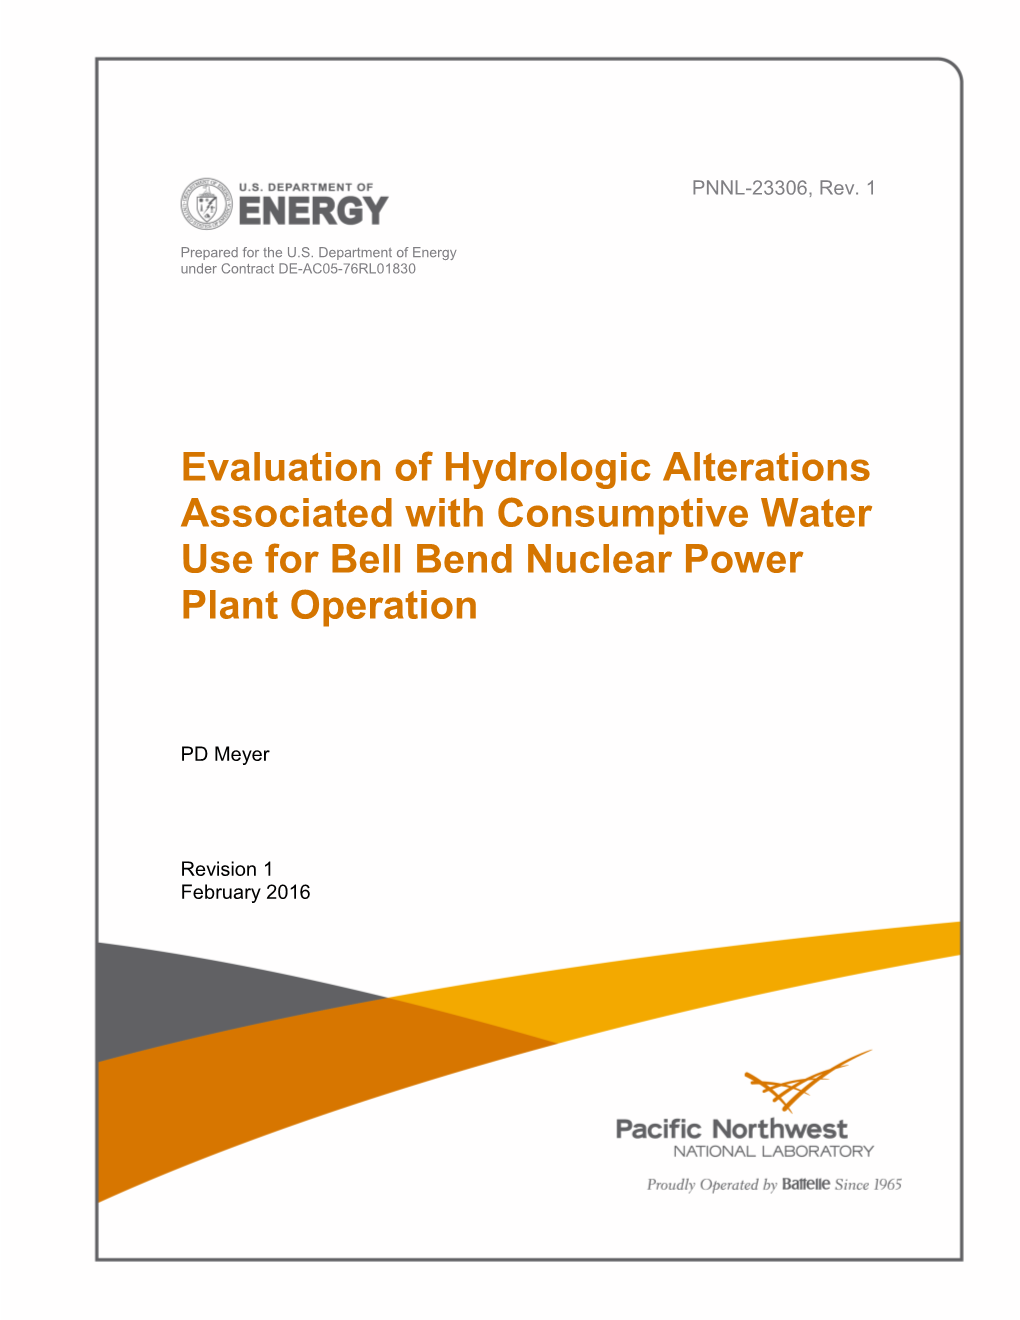 TN3566, Evaluation of Hydrologic Alterations Associated With